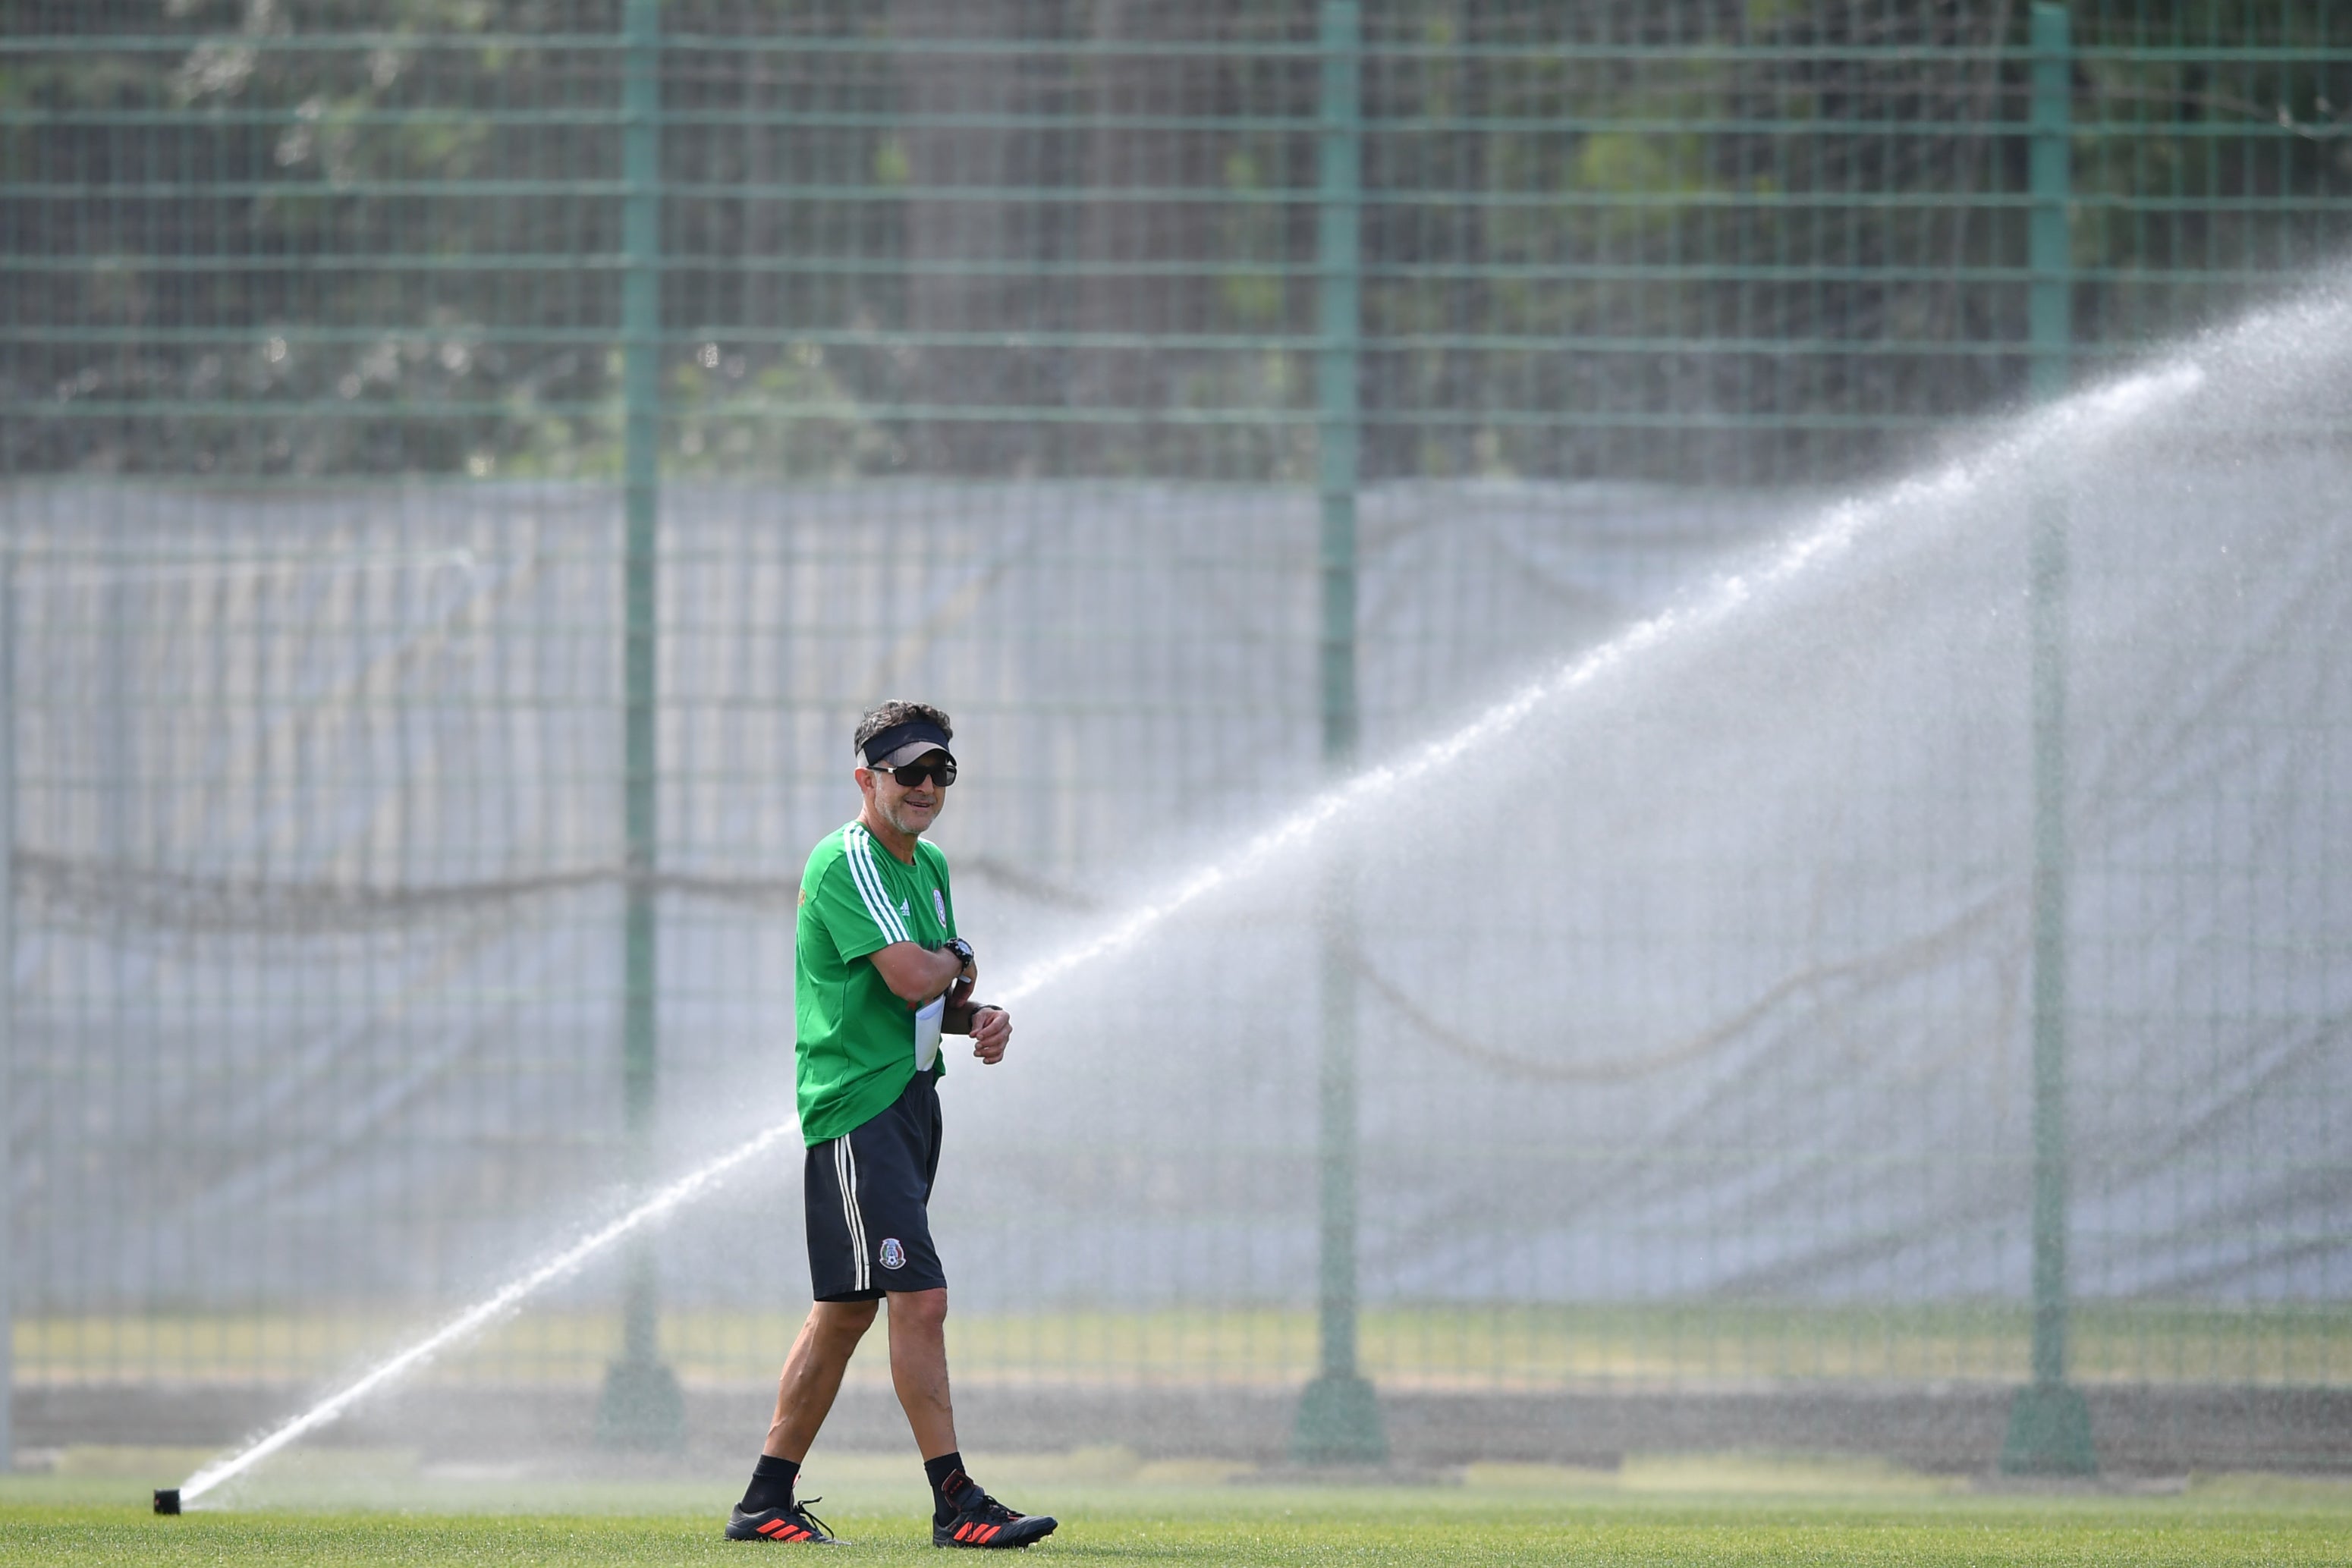 Juan Carlos Osorio, coach of Mexico looks on during a training at Training Base Novogorsk-Dynamo, on June 29, 2018 in Moscow, Russia.